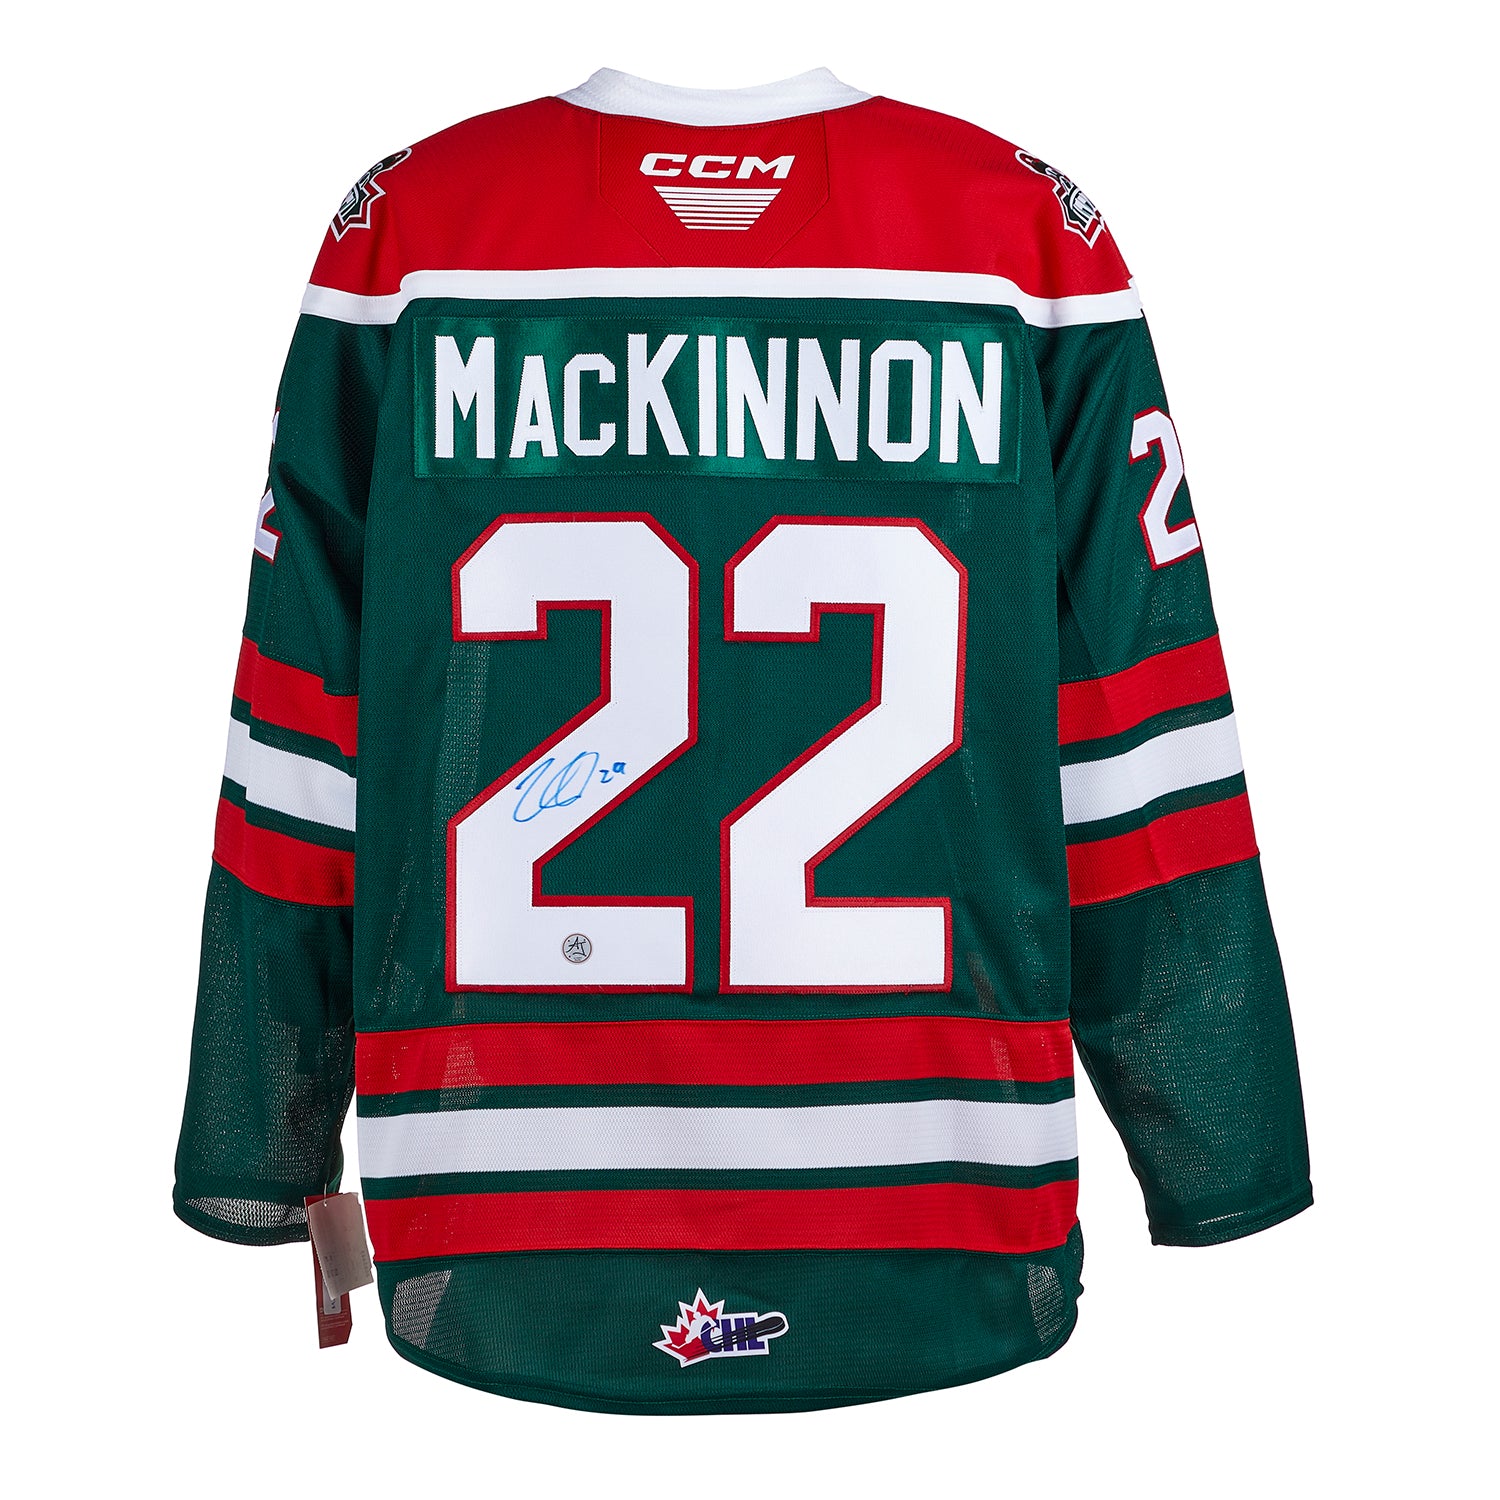 Halifax Mooseheads - How'd you like to win a signed Nico Hischier jersey?  Do a little shopping and we'll put you in a draw. Visit www.Mooseshop.ca